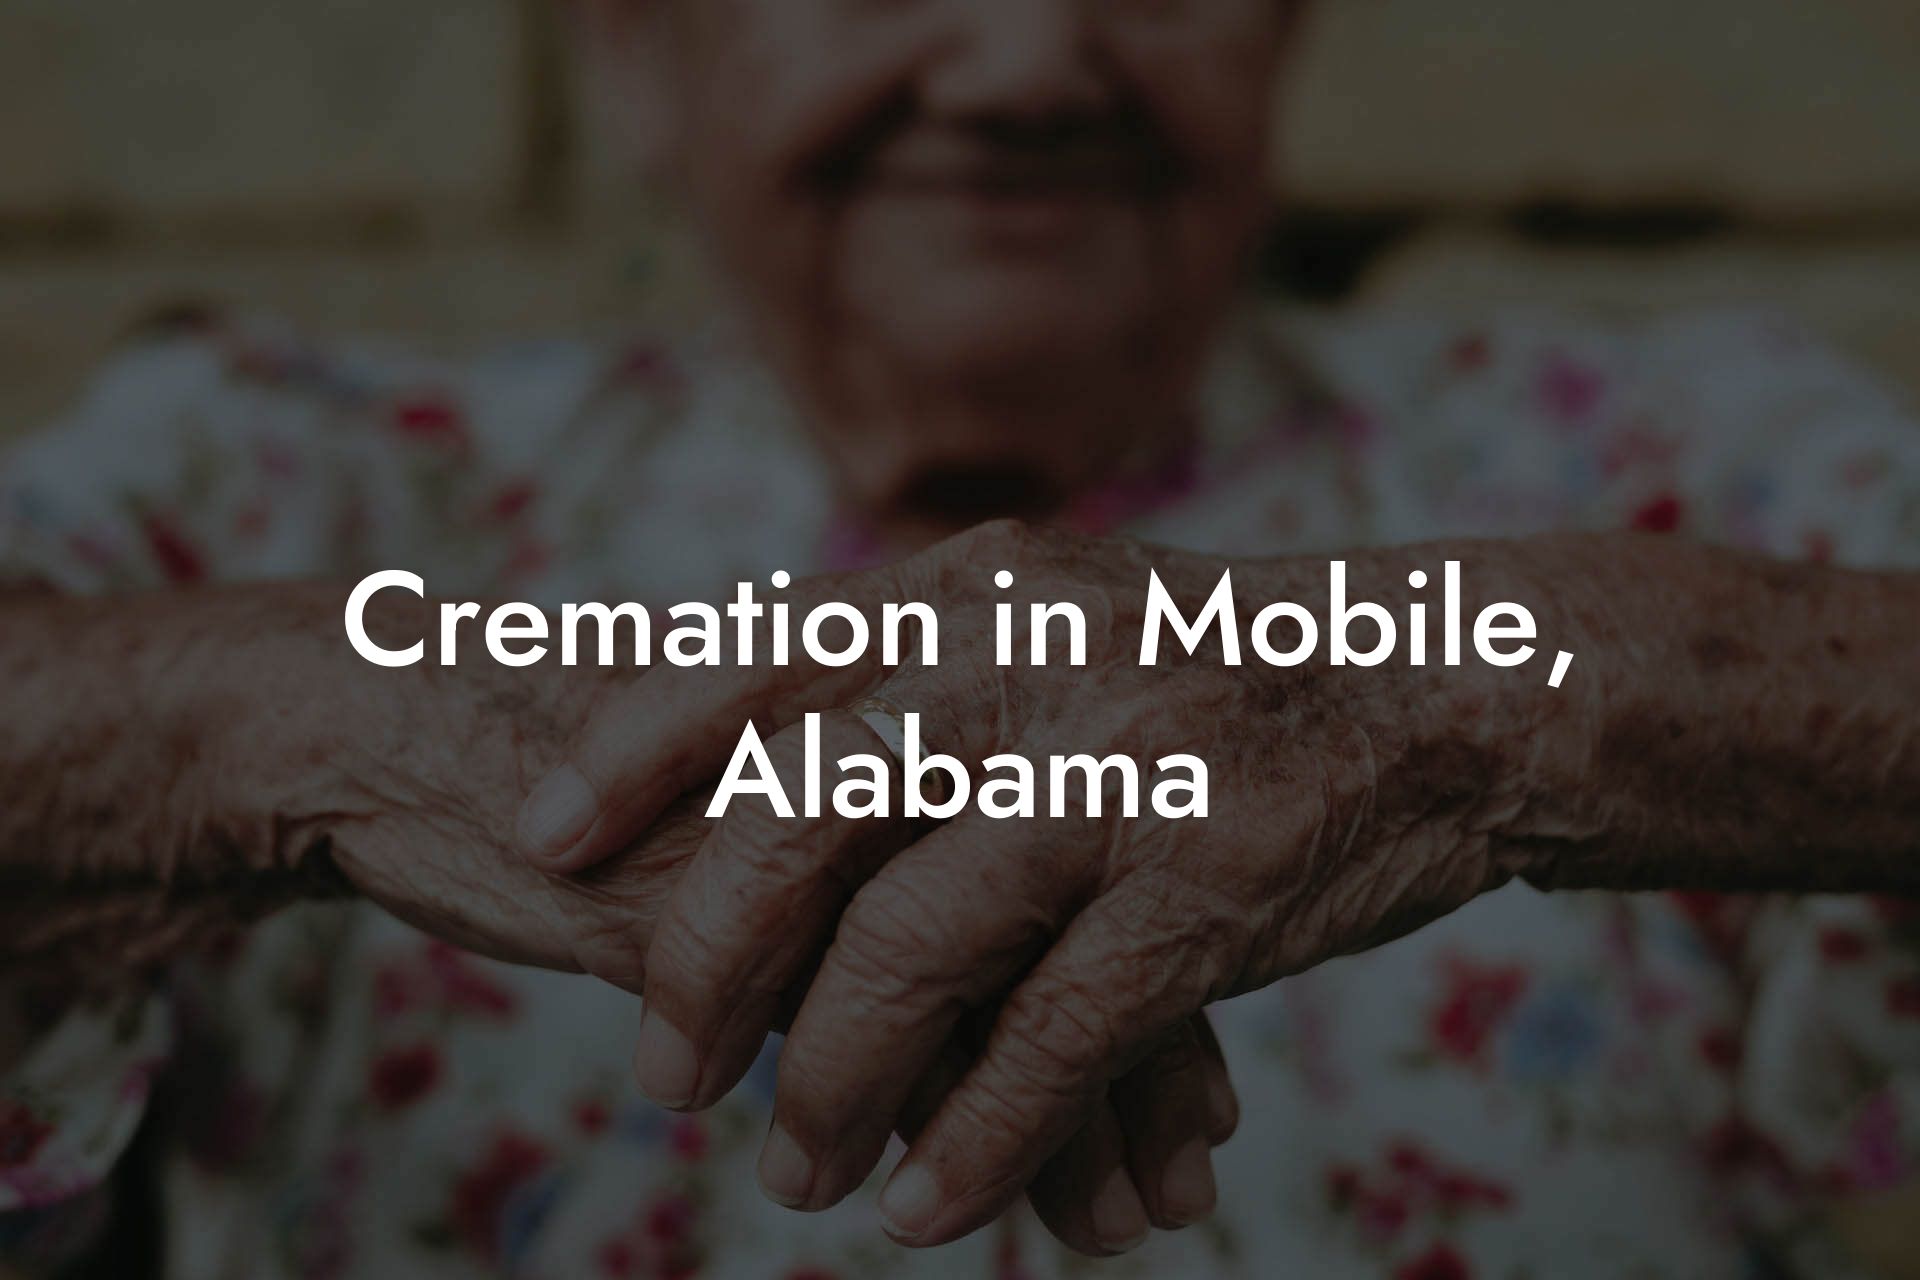 Cremation in Mobile, Alabama